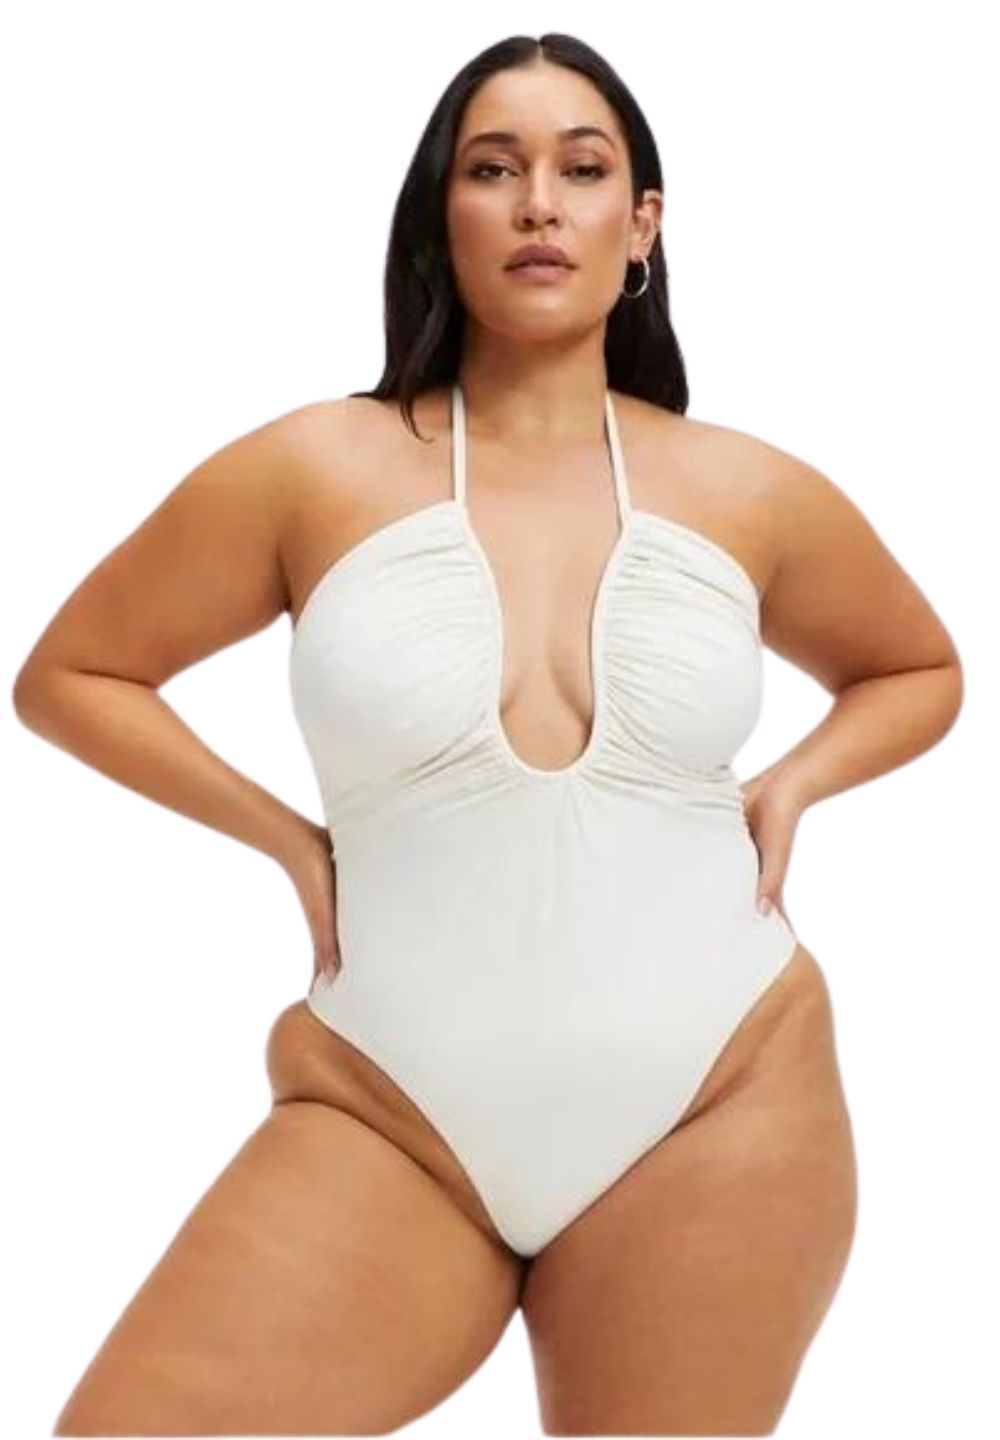 Good American Plunge Neck Ivory Onepiece Swimsuit, Size XL and 2X